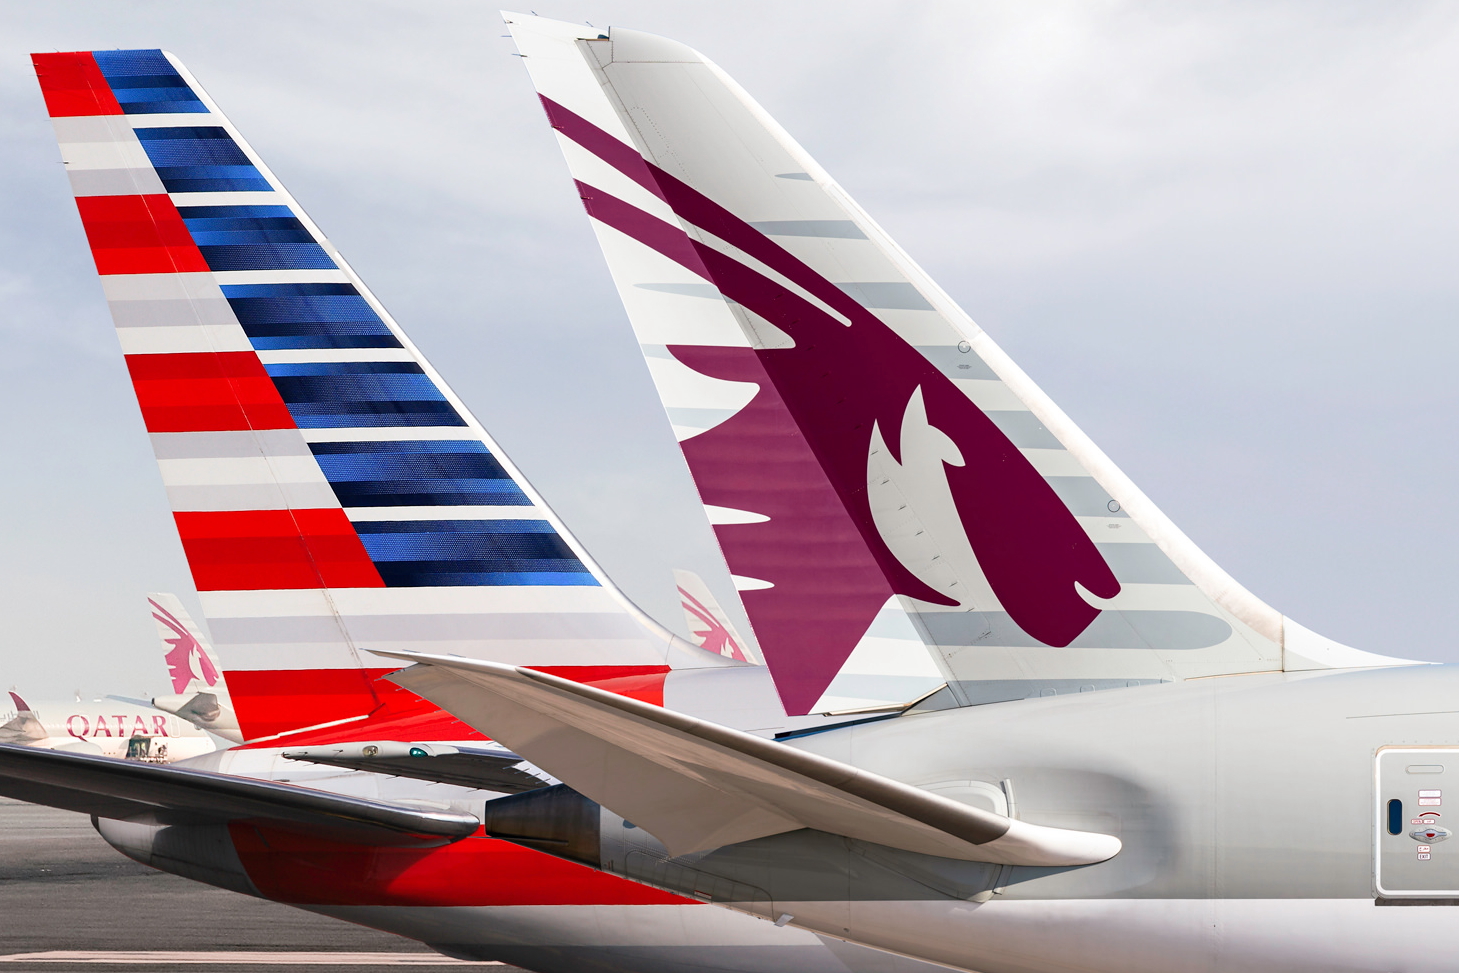 The first stage of a strategic partnership between Qatar Airways and American Airlines has commenced with Qatar Airways placing its code on American Airlines’ domestic flights. Click to enlarge.